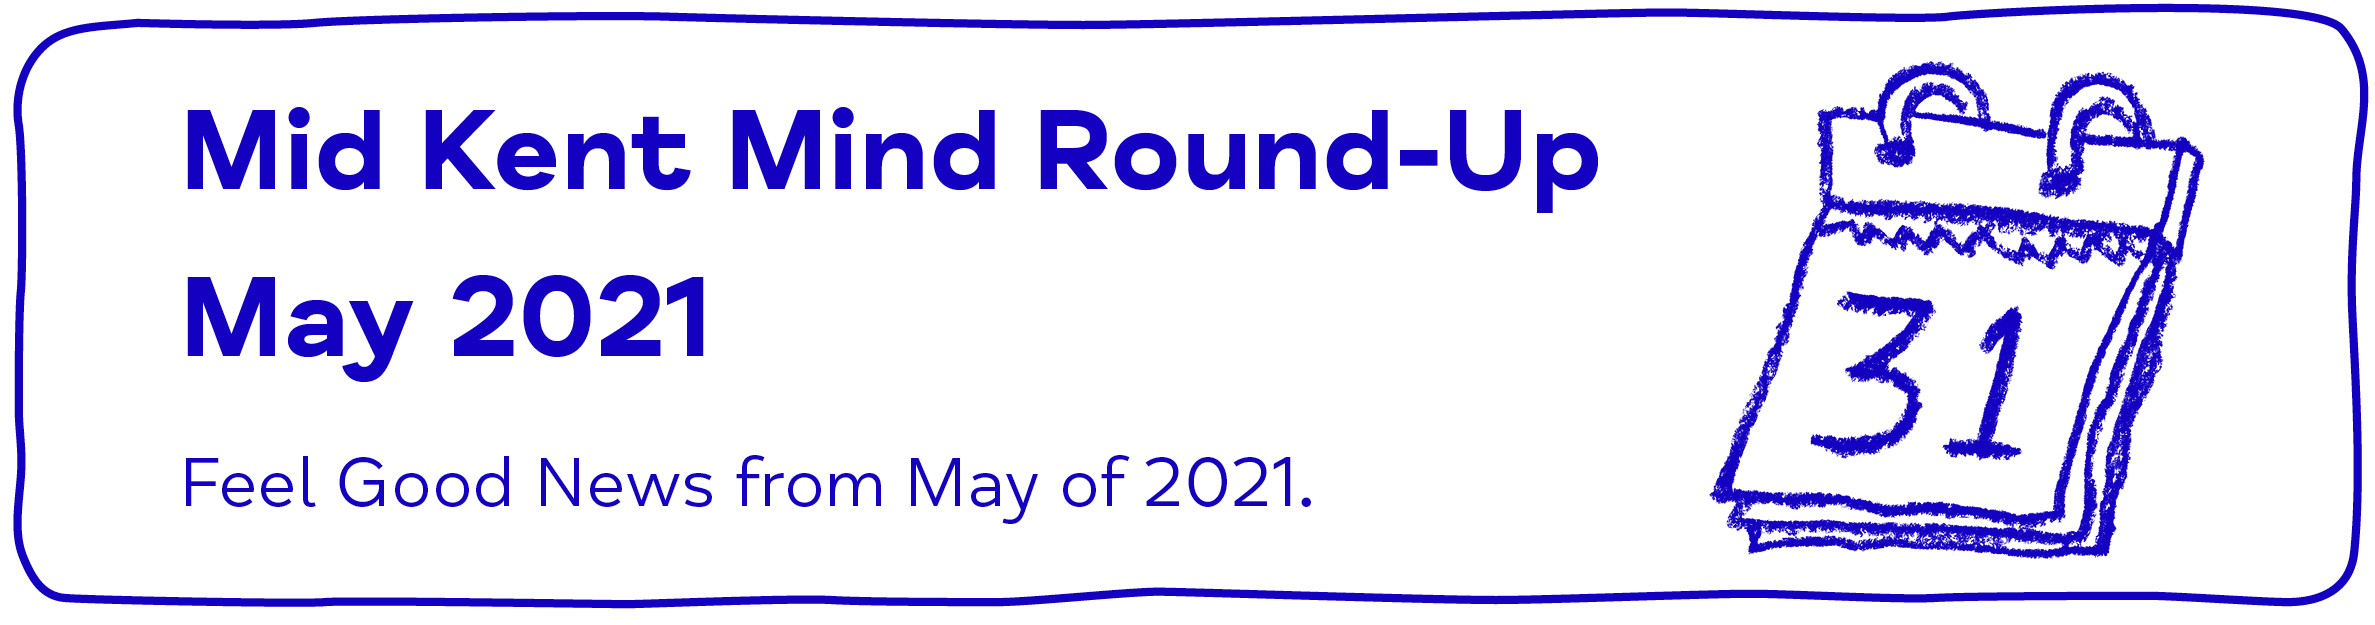 Mid Kent Mind Round-Up May 2021 Feel Good News from May of 2021 - Mid Kent Mind Newsletter - May 2021